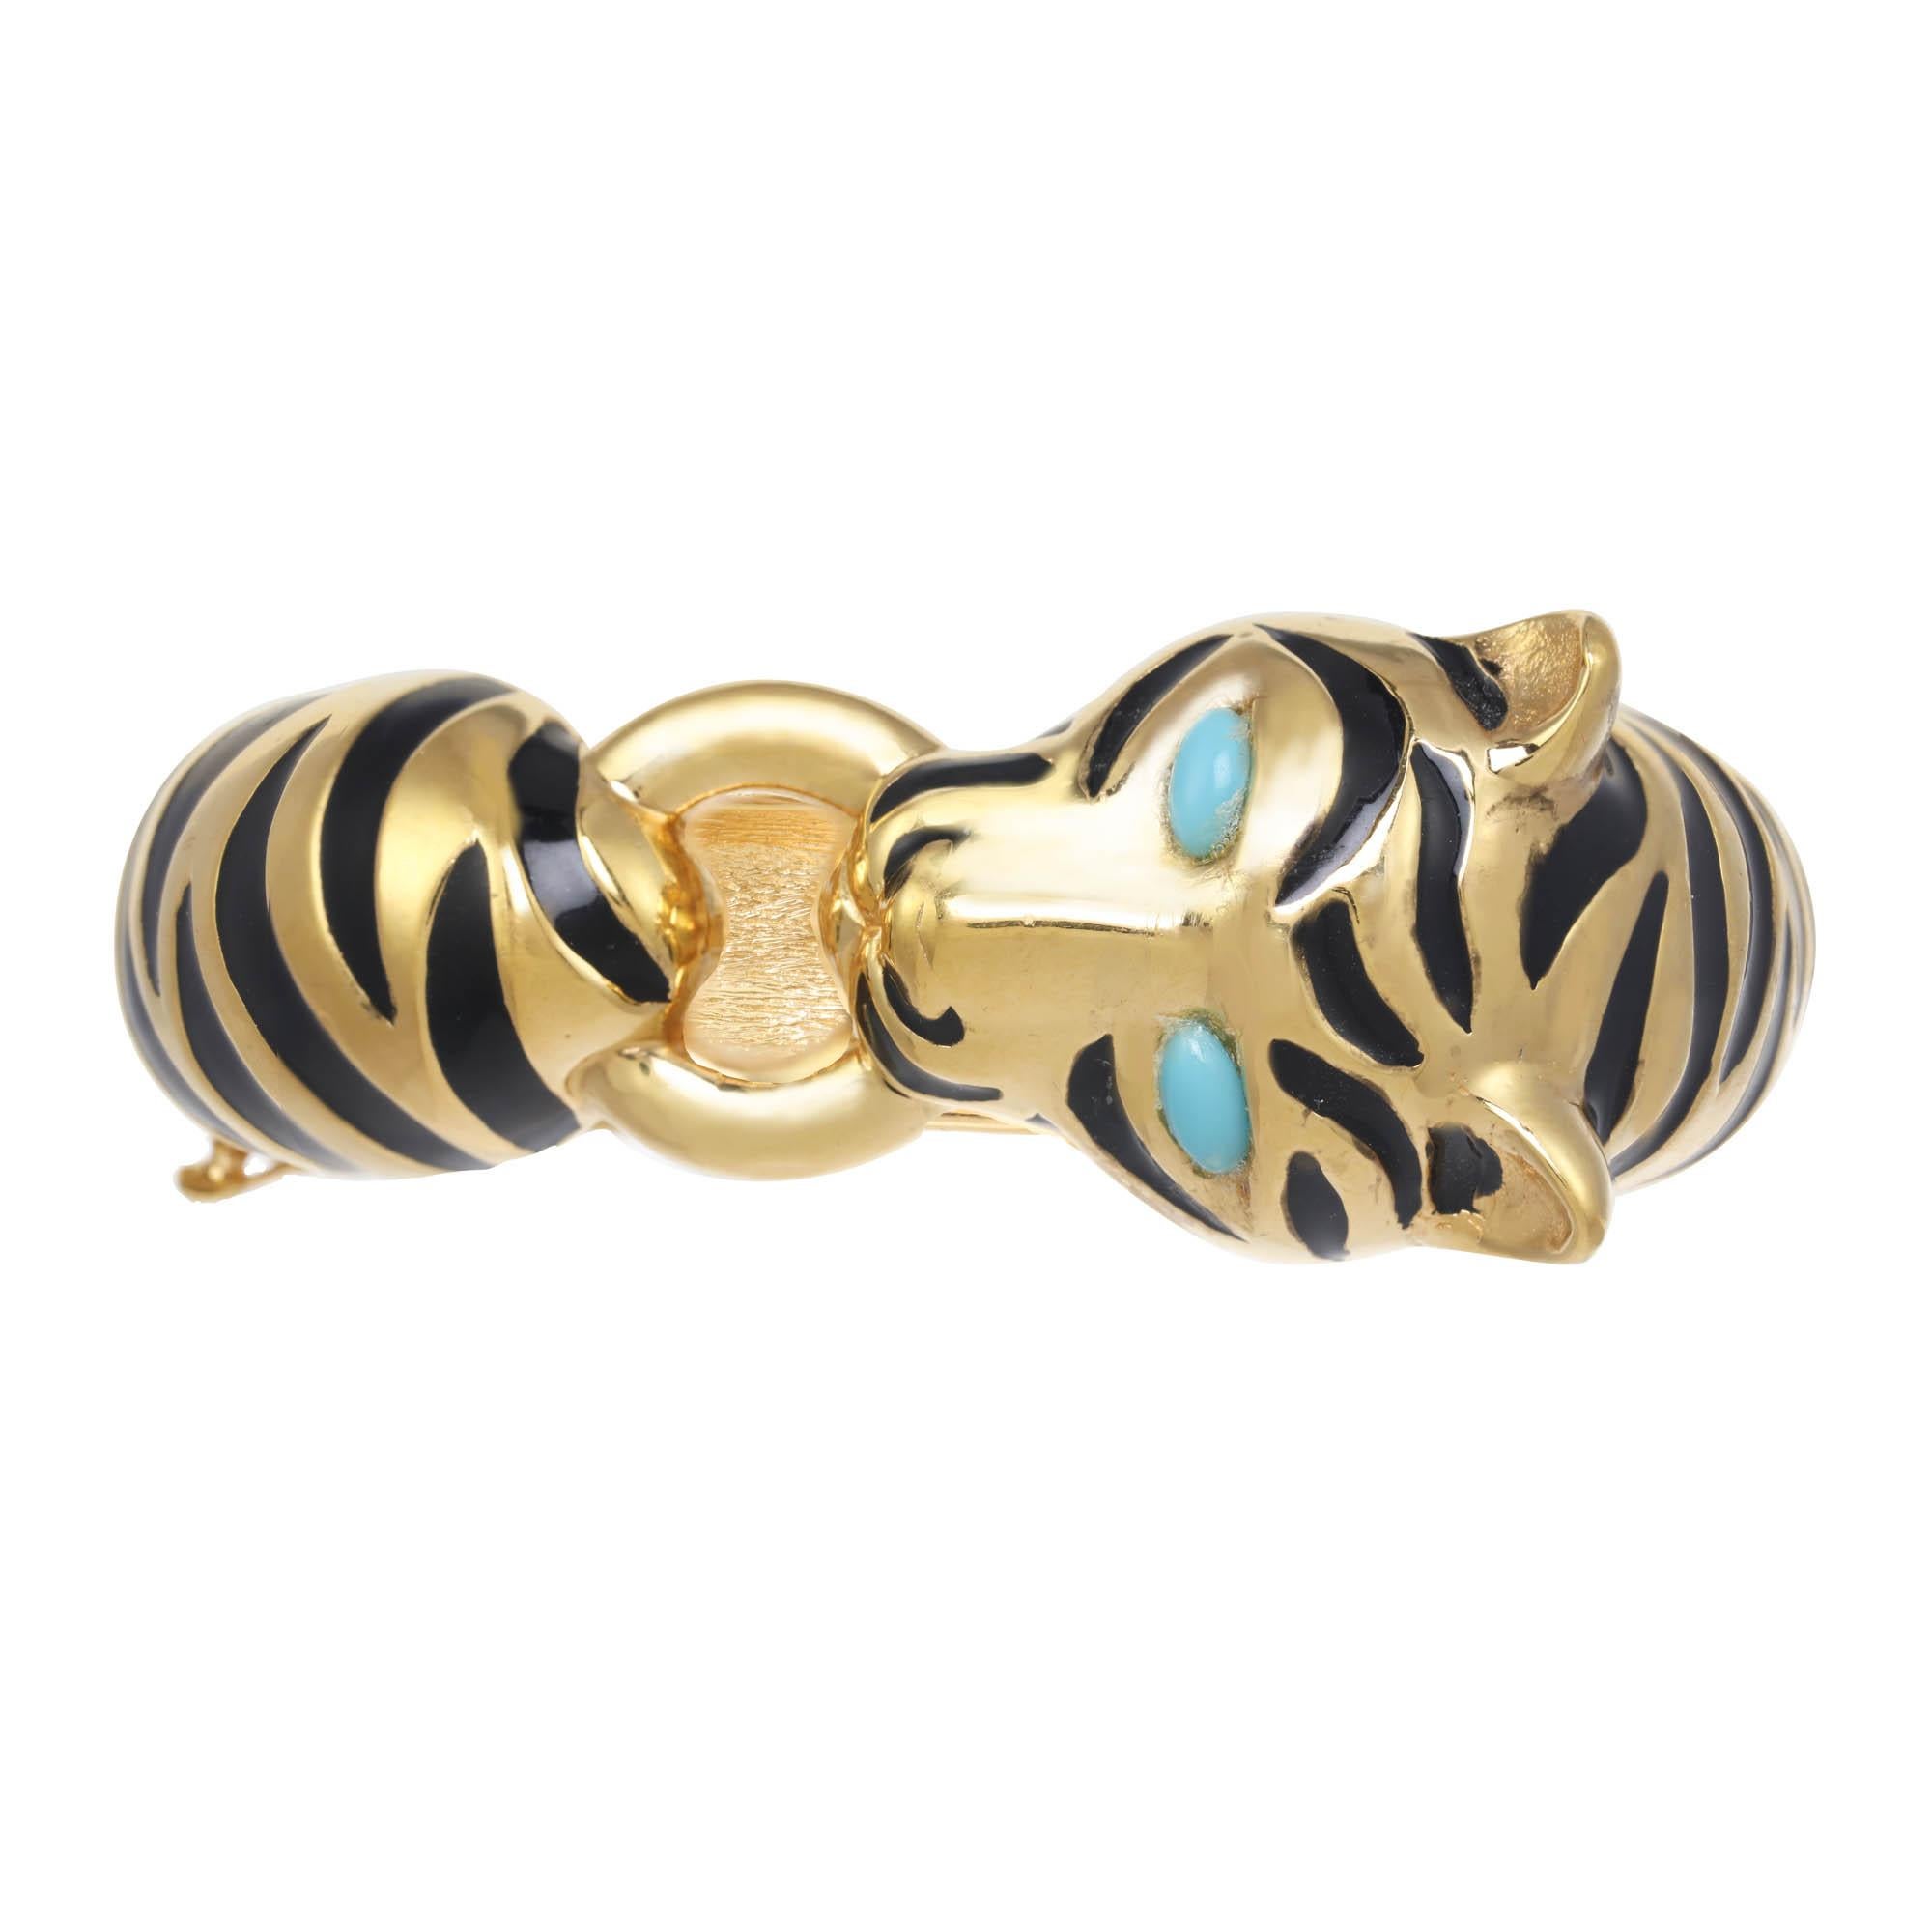 The Tiger Animal Bracelet is a fierce addition to your jewelry collection.

PLEASE NOTE: The pieces available are not vintage and are not reproductions. 
CINER uses original models to produce our jewelry today. 
If you would like to custom order